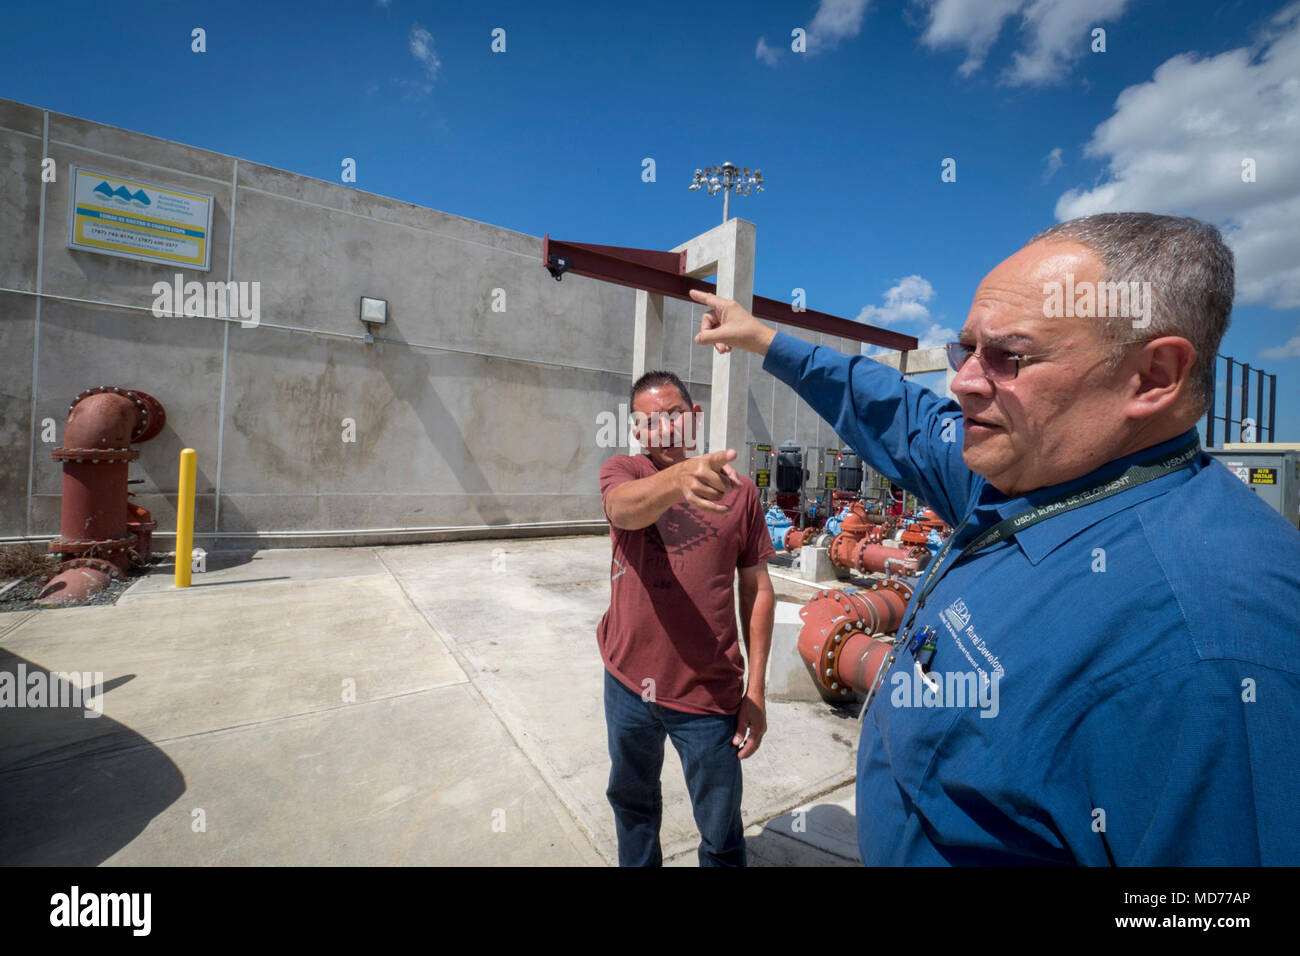 Juan Reyes with the Puerto Rico water authority shows USDA Loan Officer Julio Chevres at the water treatment facility in Caguas that was built with UDSA fund. Stock Photo